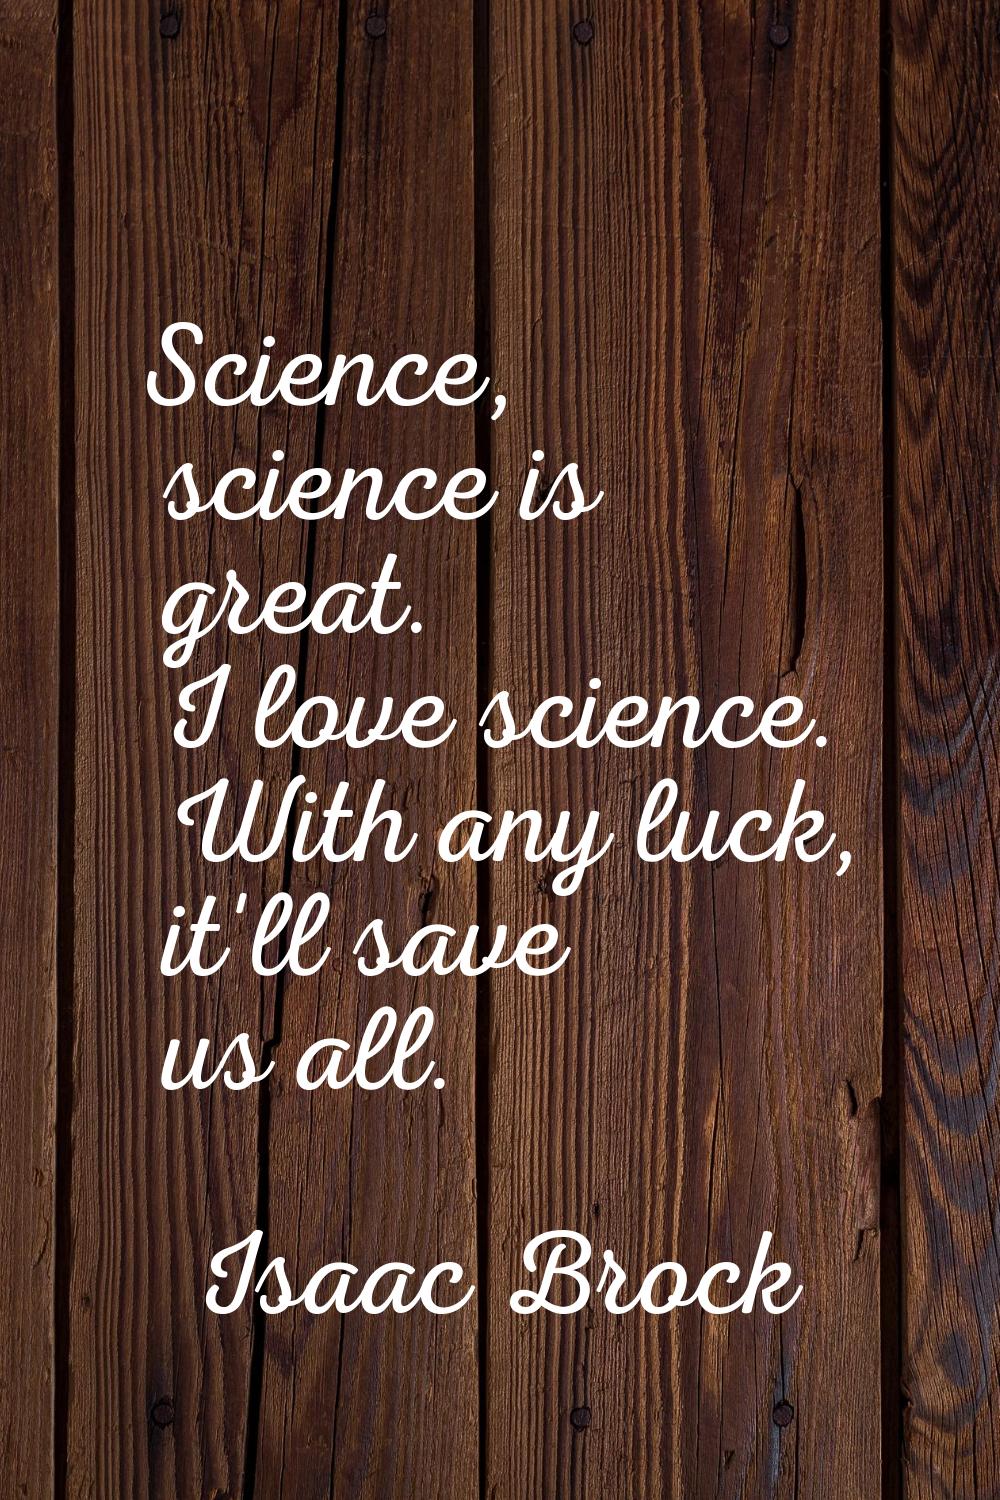 Science, science is great. I love science. With any luck, it'll save us all.